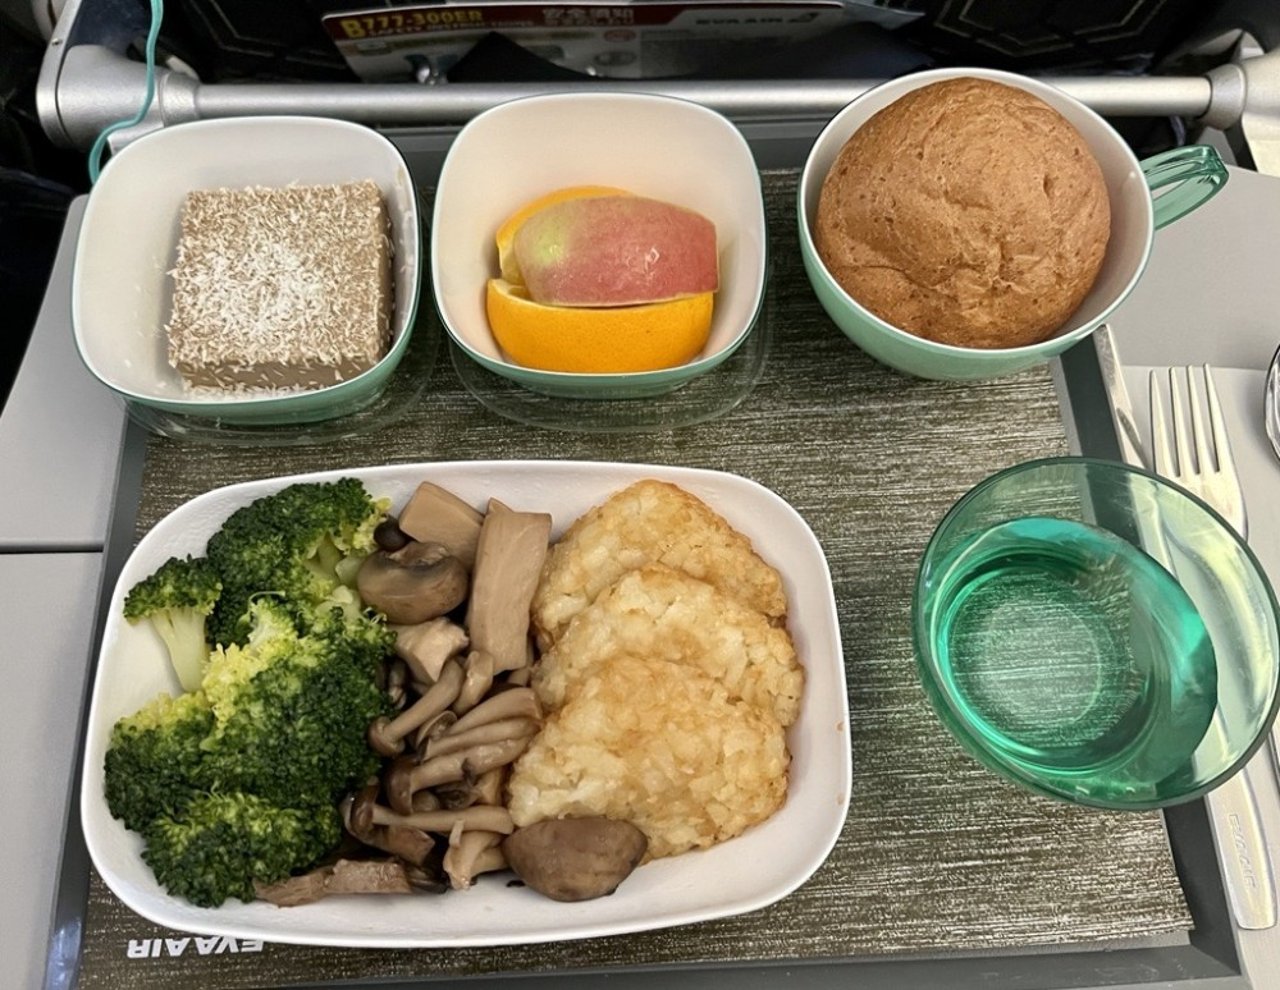 an example of a vegan meal served on a flight